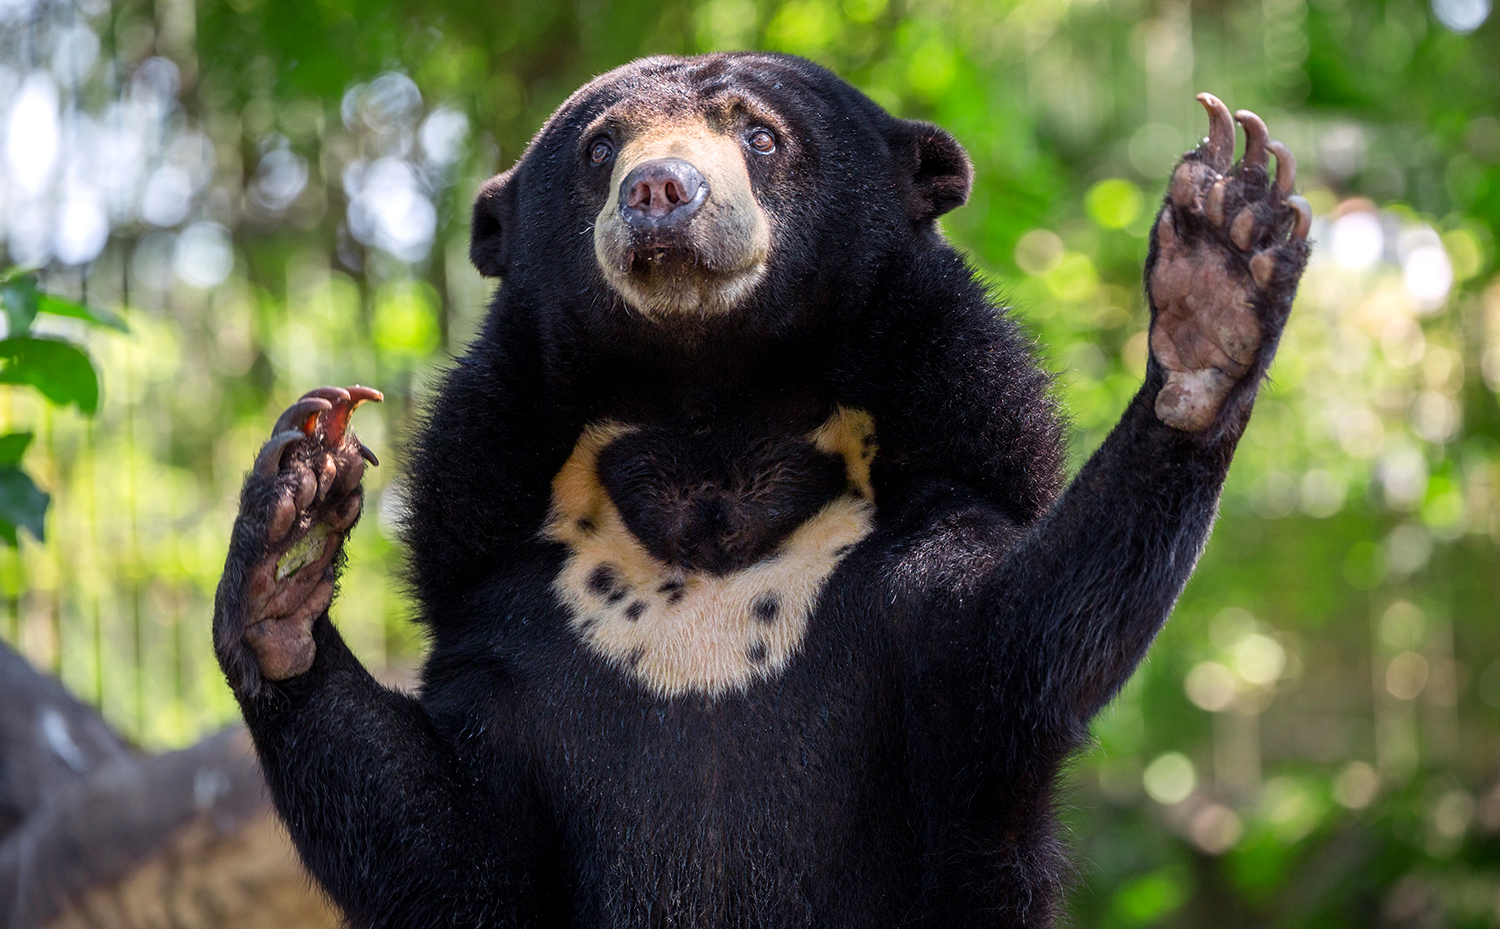 Top half of a sun bear standing on its hind legs and holding up its two front paws.